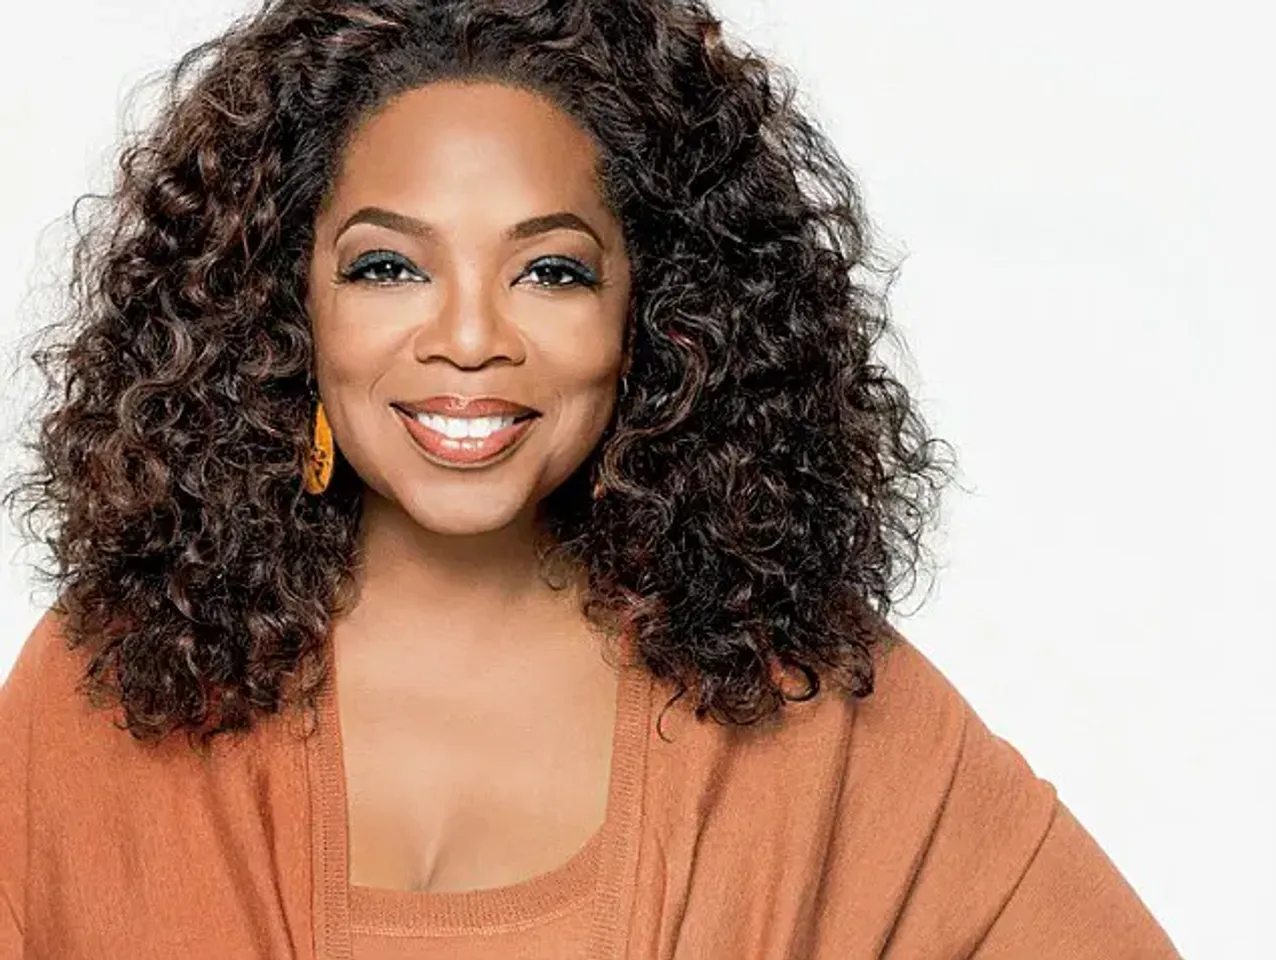 Apple To Collaborate With Oprah Winfrey For Their Streaming Service